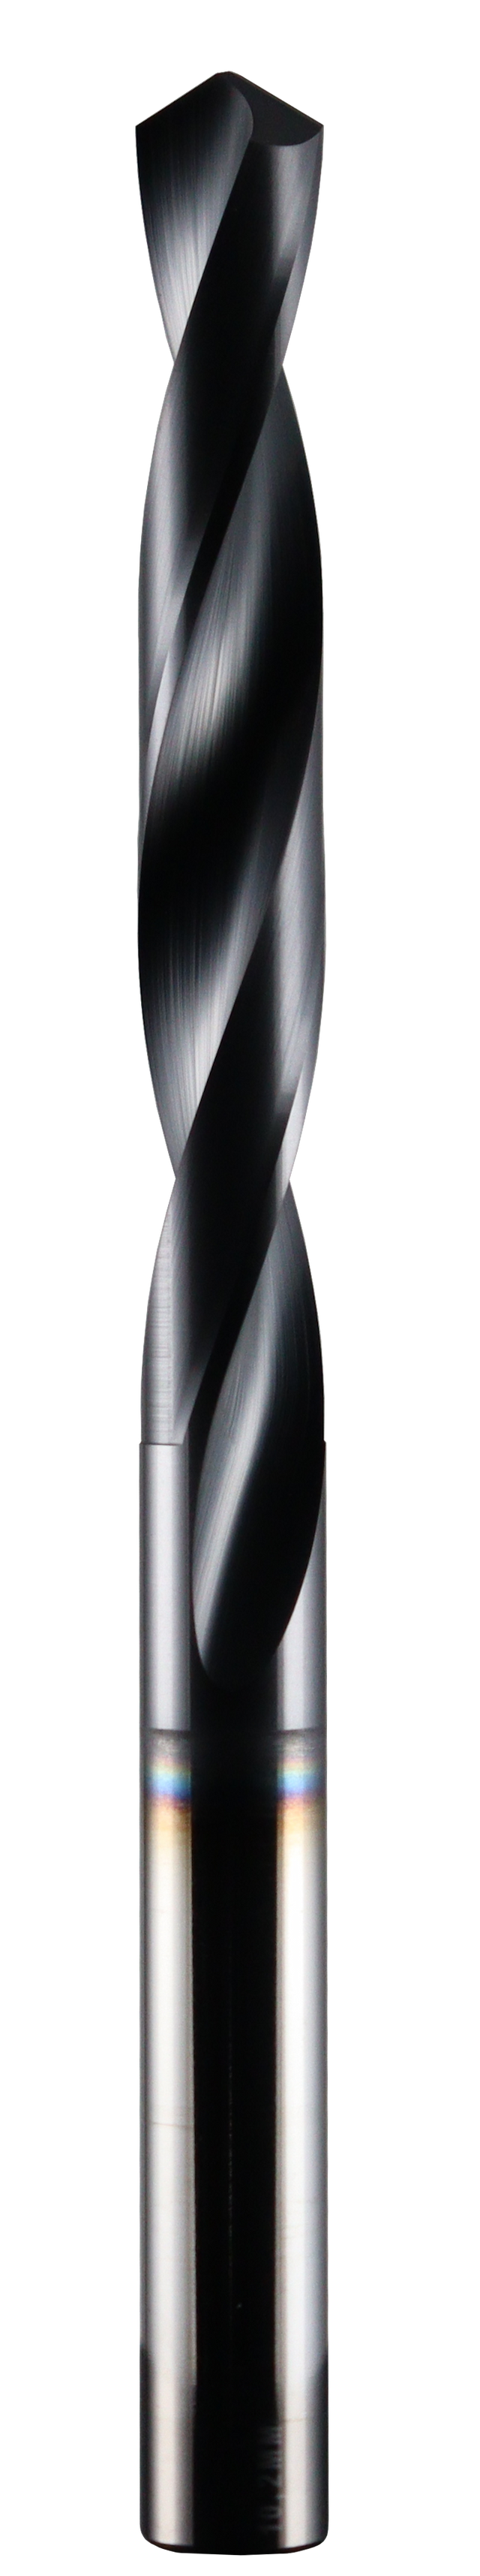 5.10mm Dia, 118 Degree Point, Solid Carbide Drill - 68326